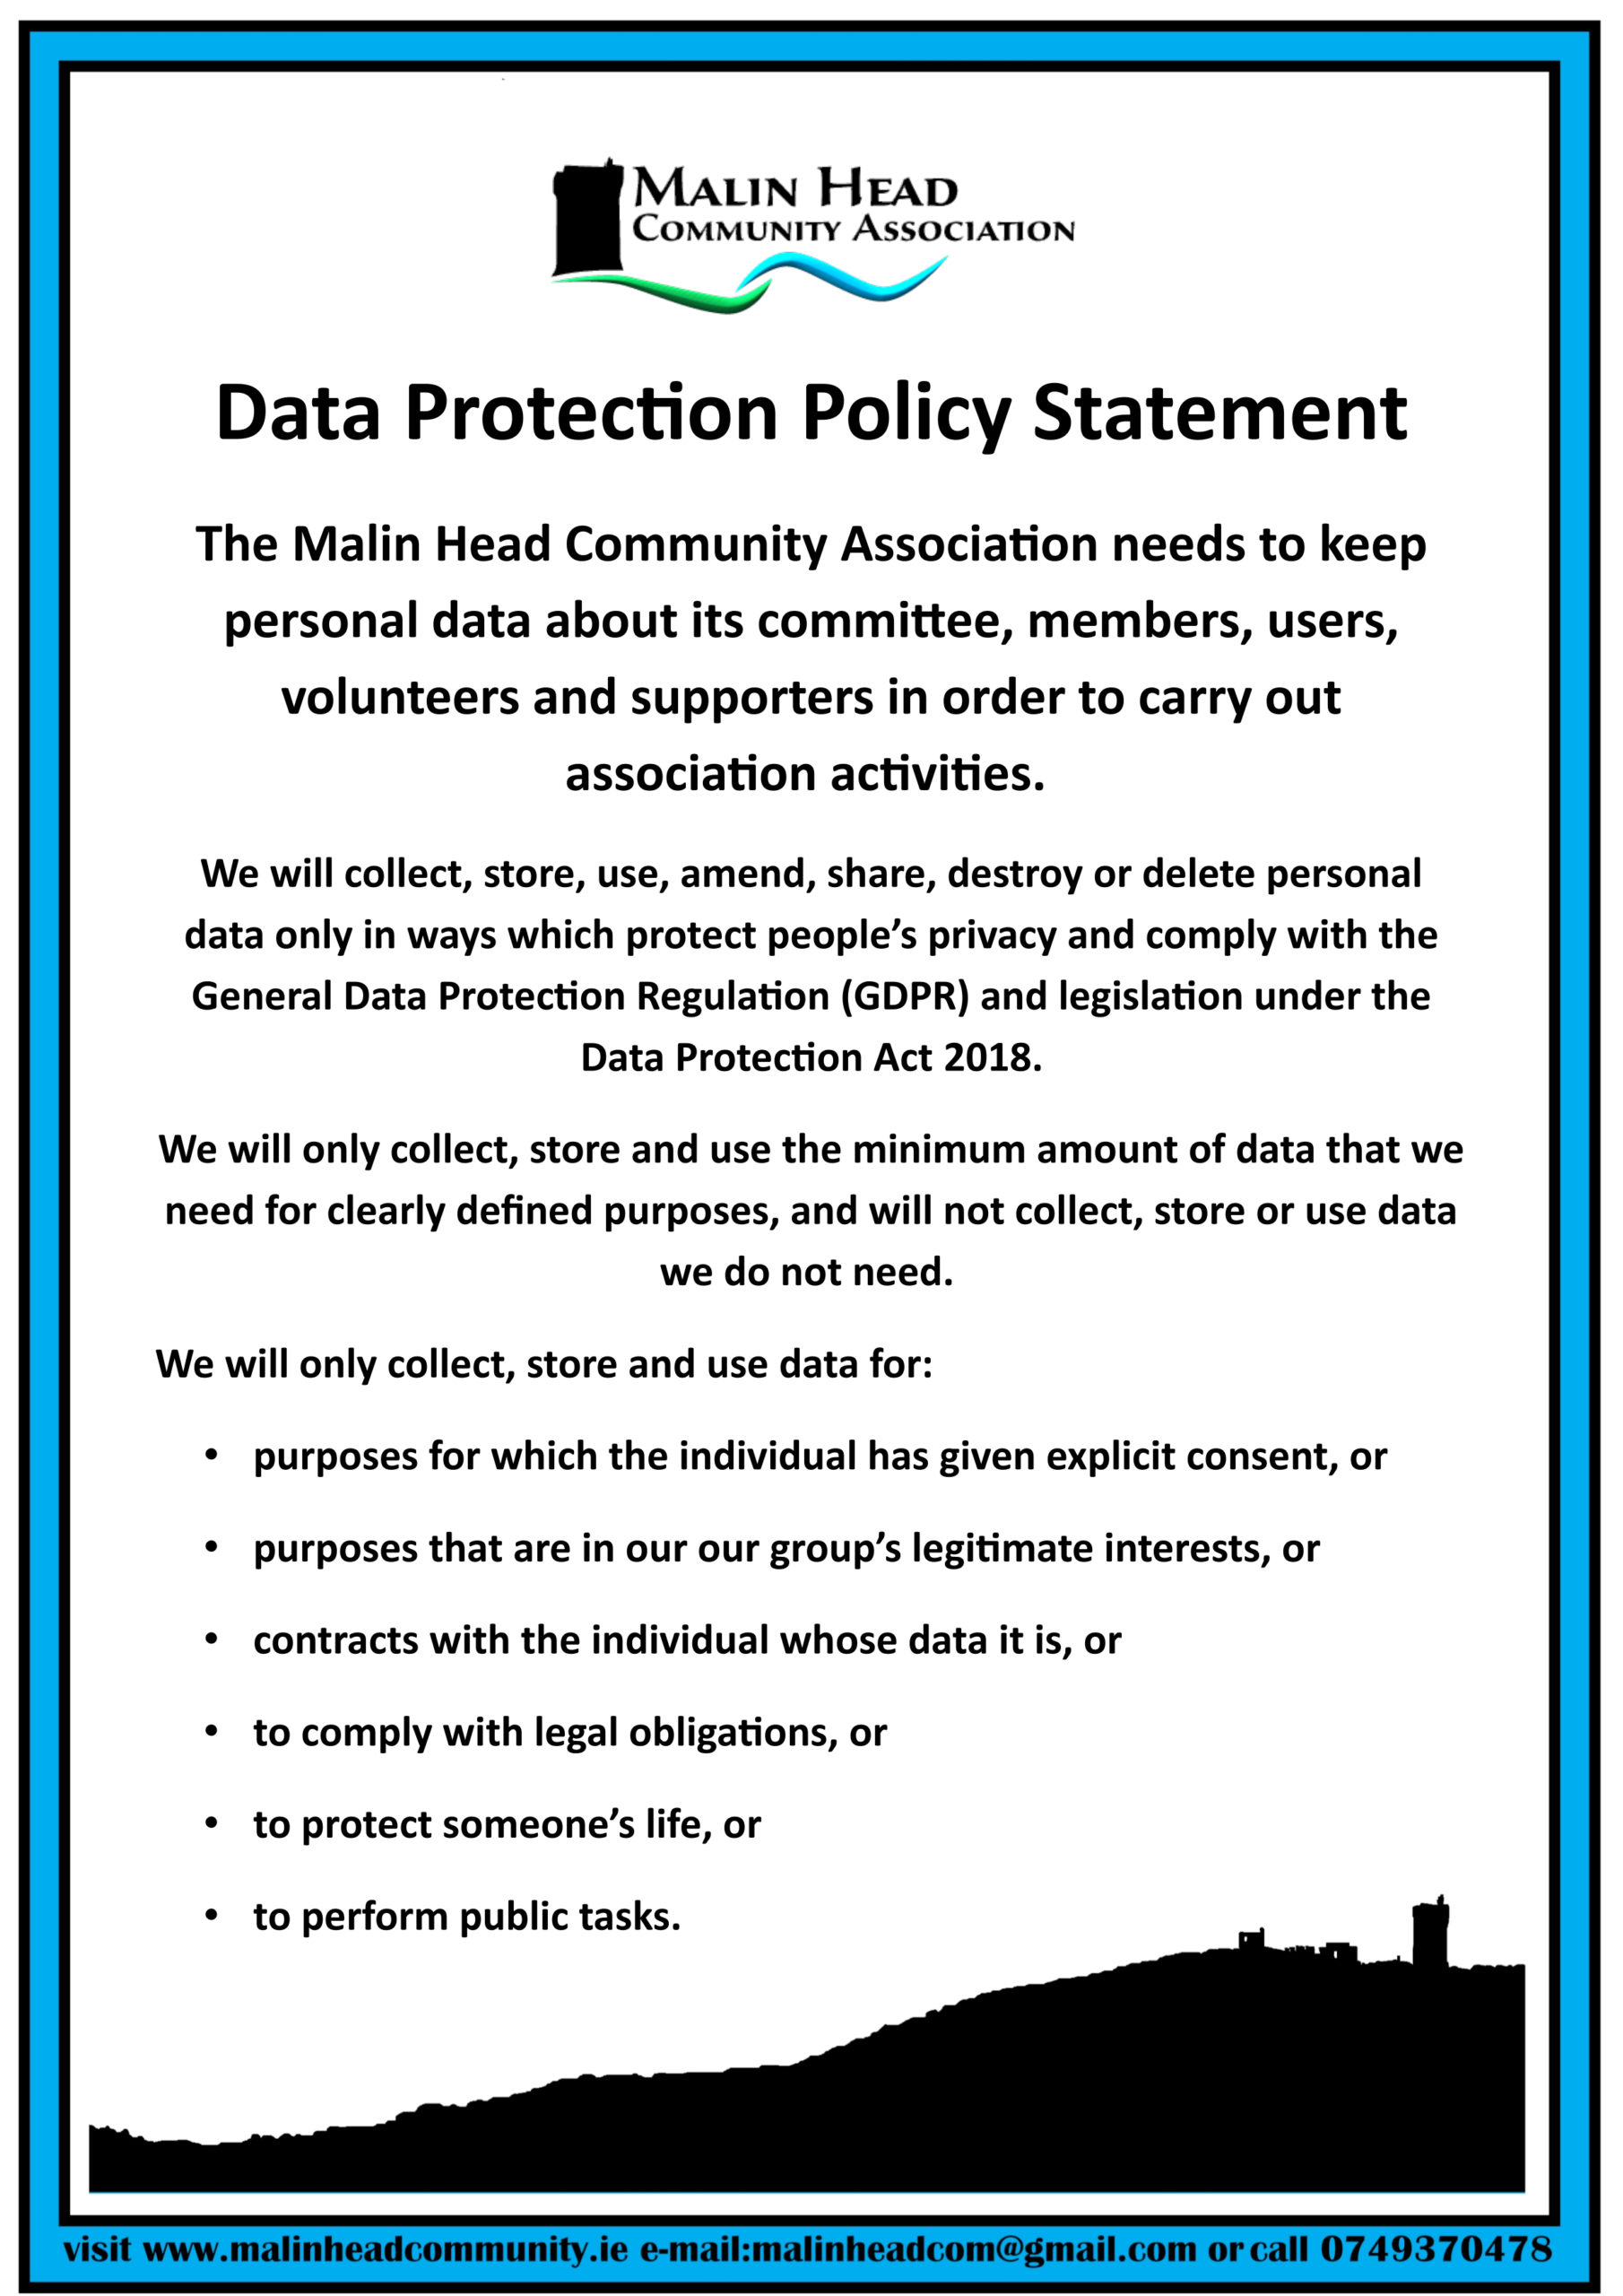 data-protection-policy-statement-malin-head-community-association